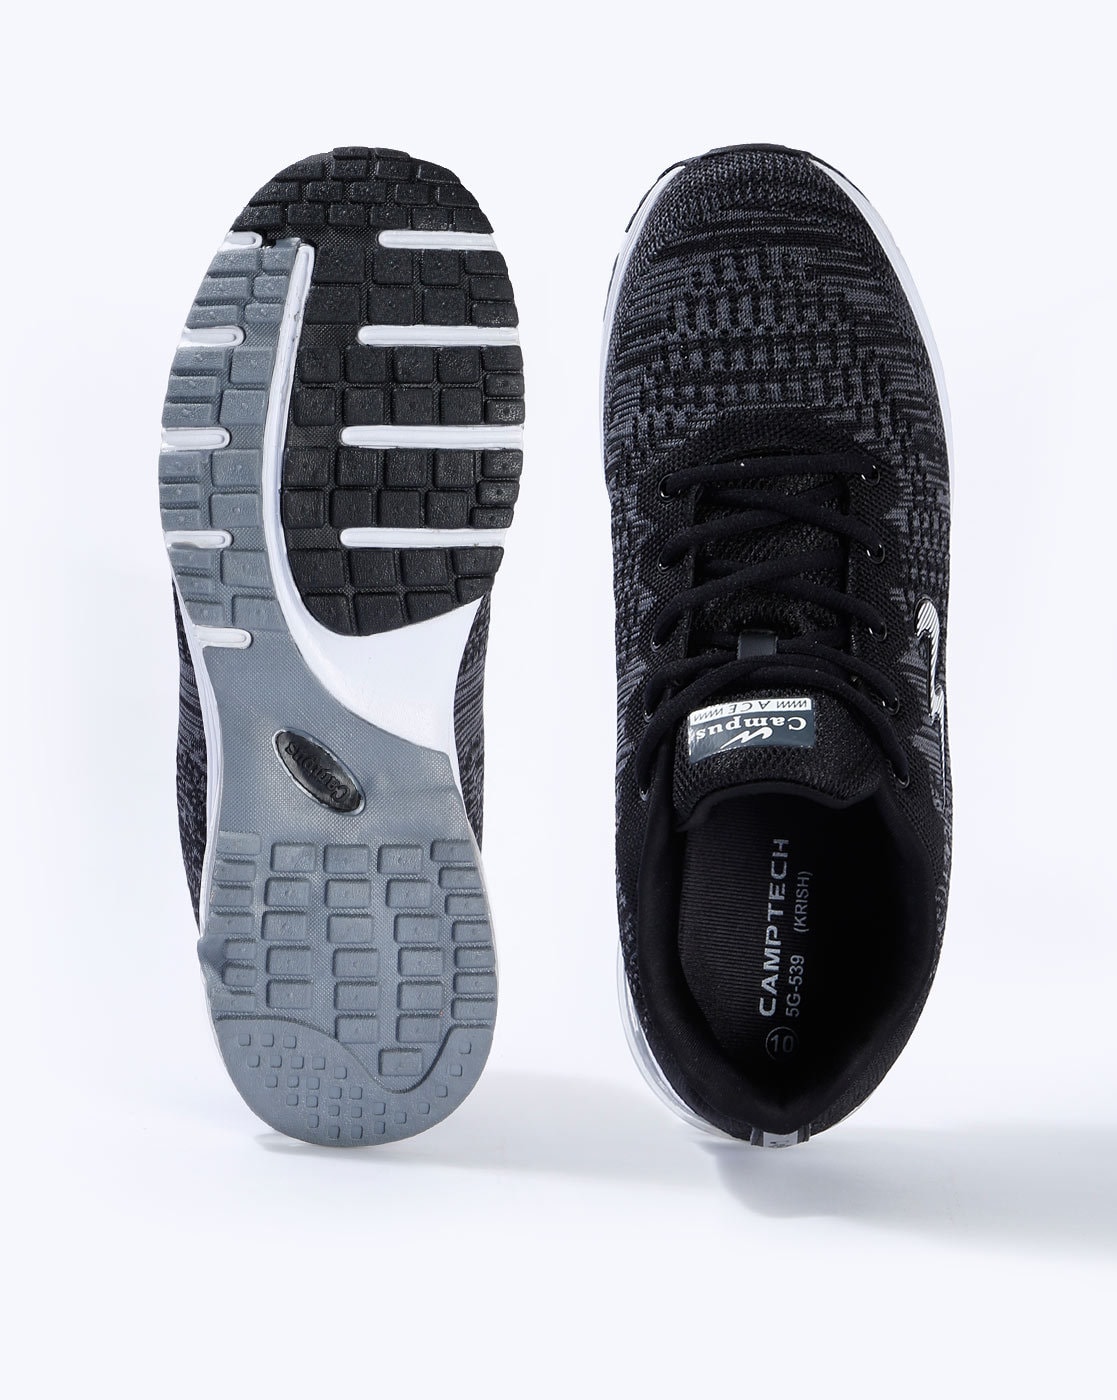 Sports Shoes for Men by Campus Online 